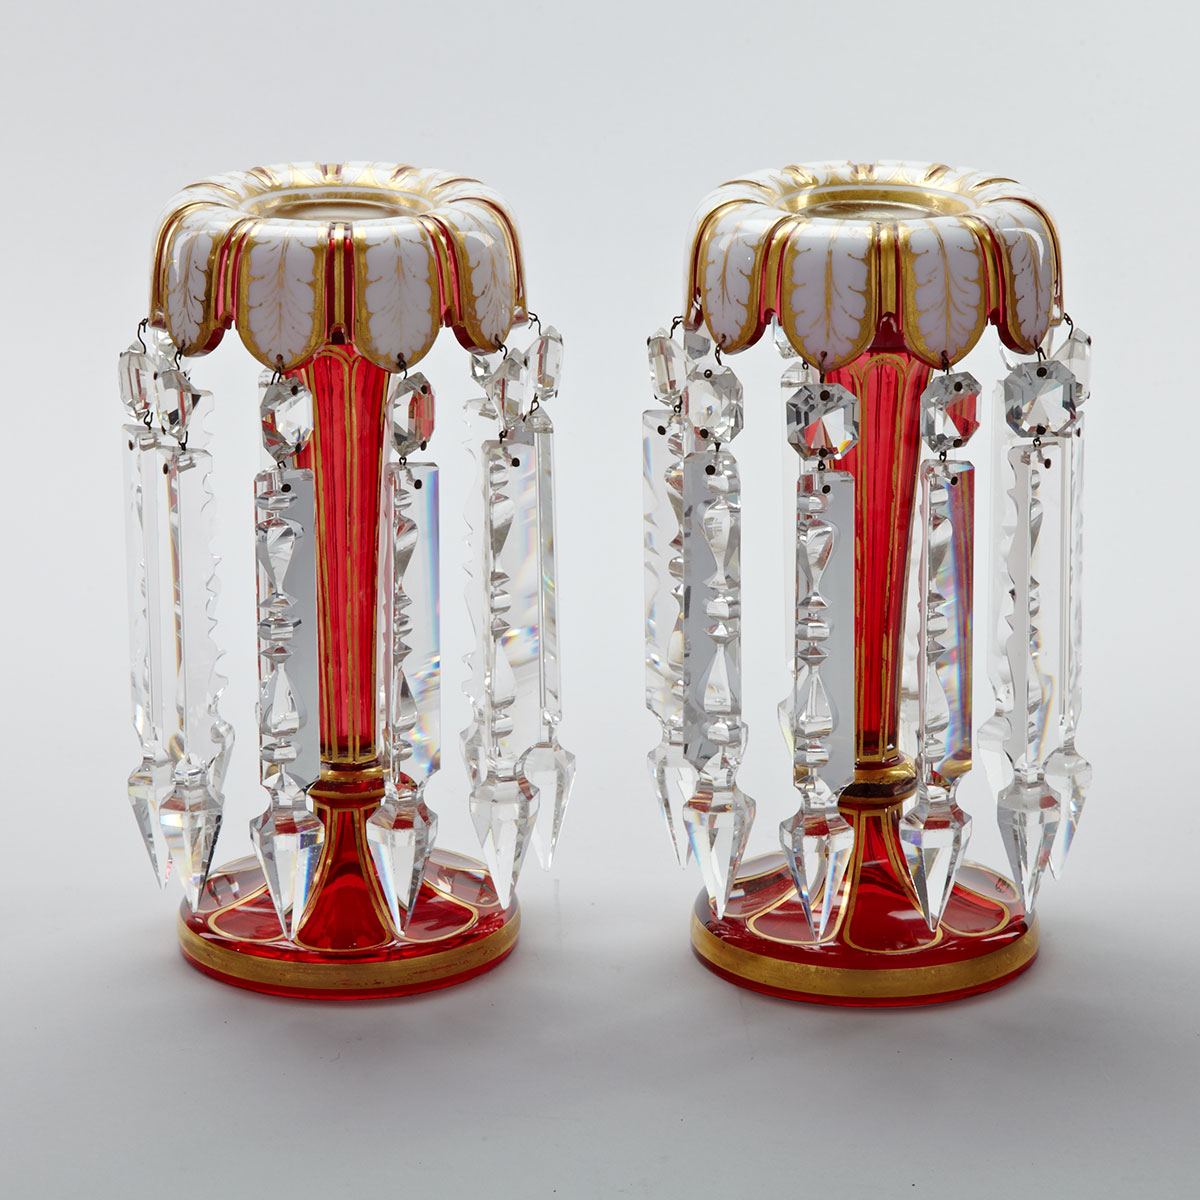 Pair of English Overlaid and Gilt Red Glass Lustres, third quarter of the 19th century